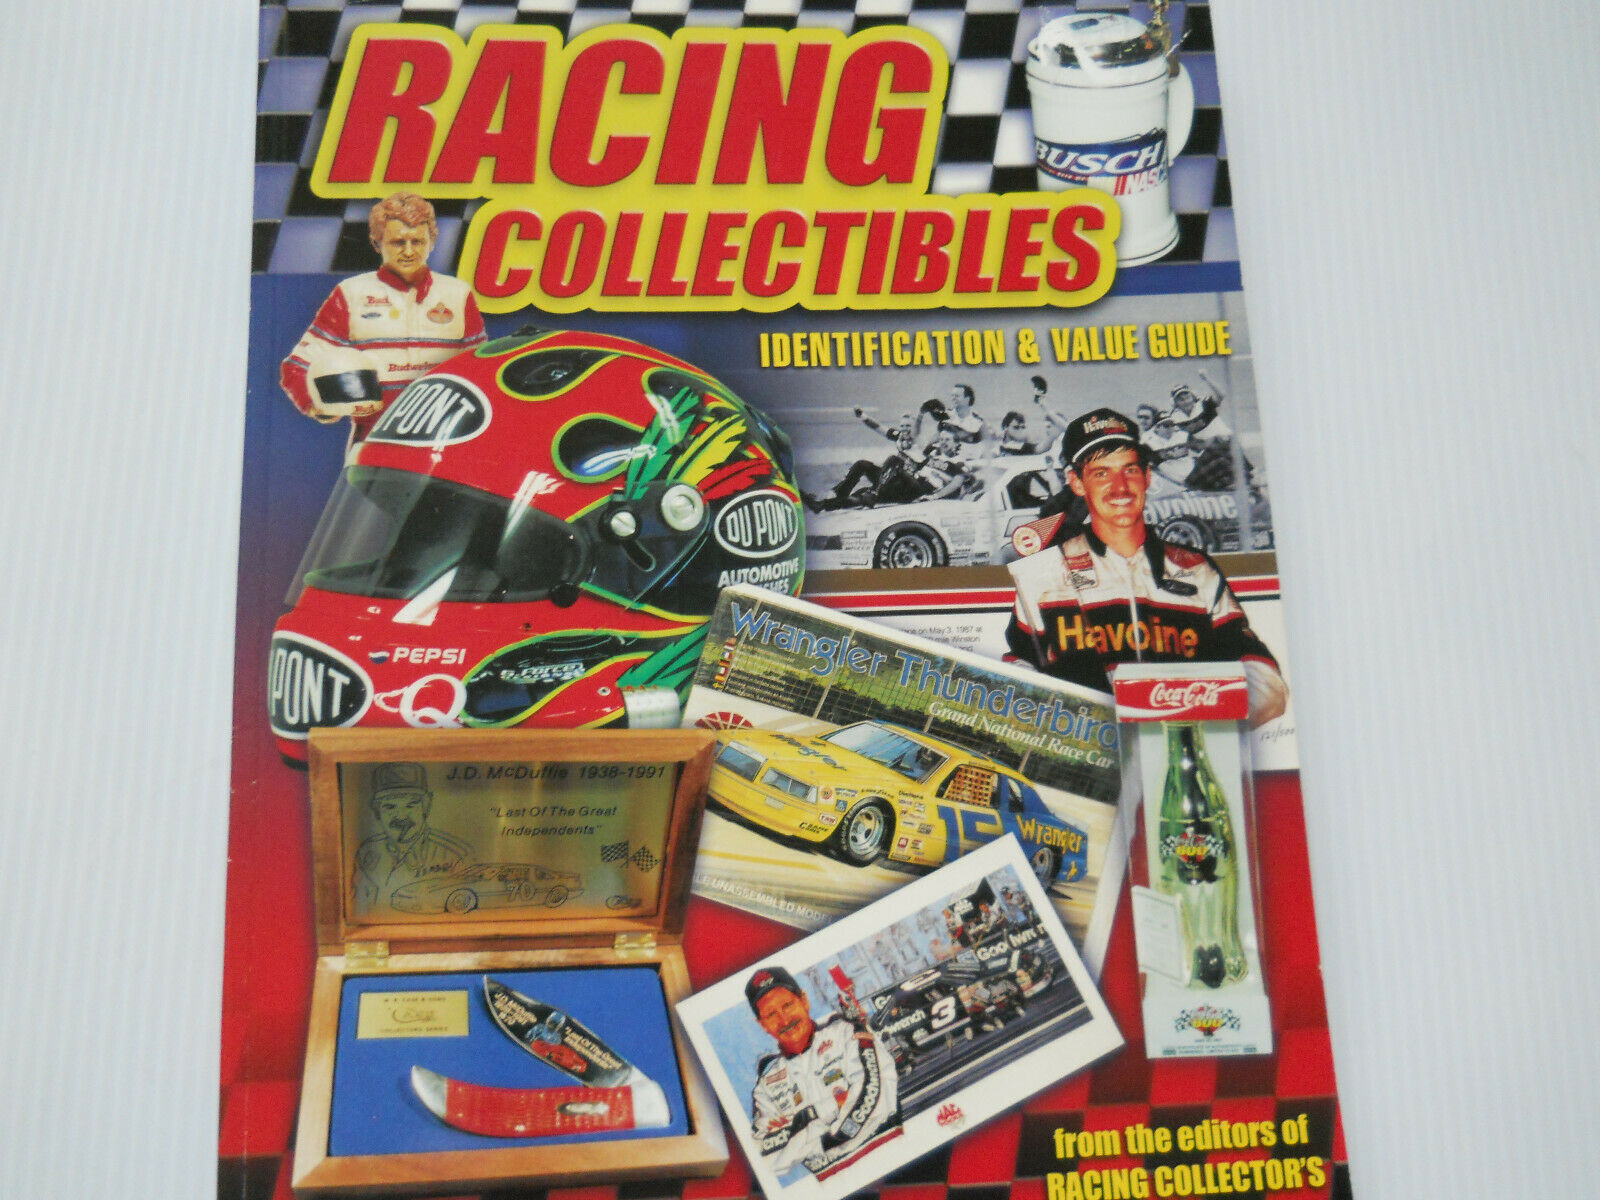 Racing Collectables 2001 Identification & Value Guide Catalog By Collector Books